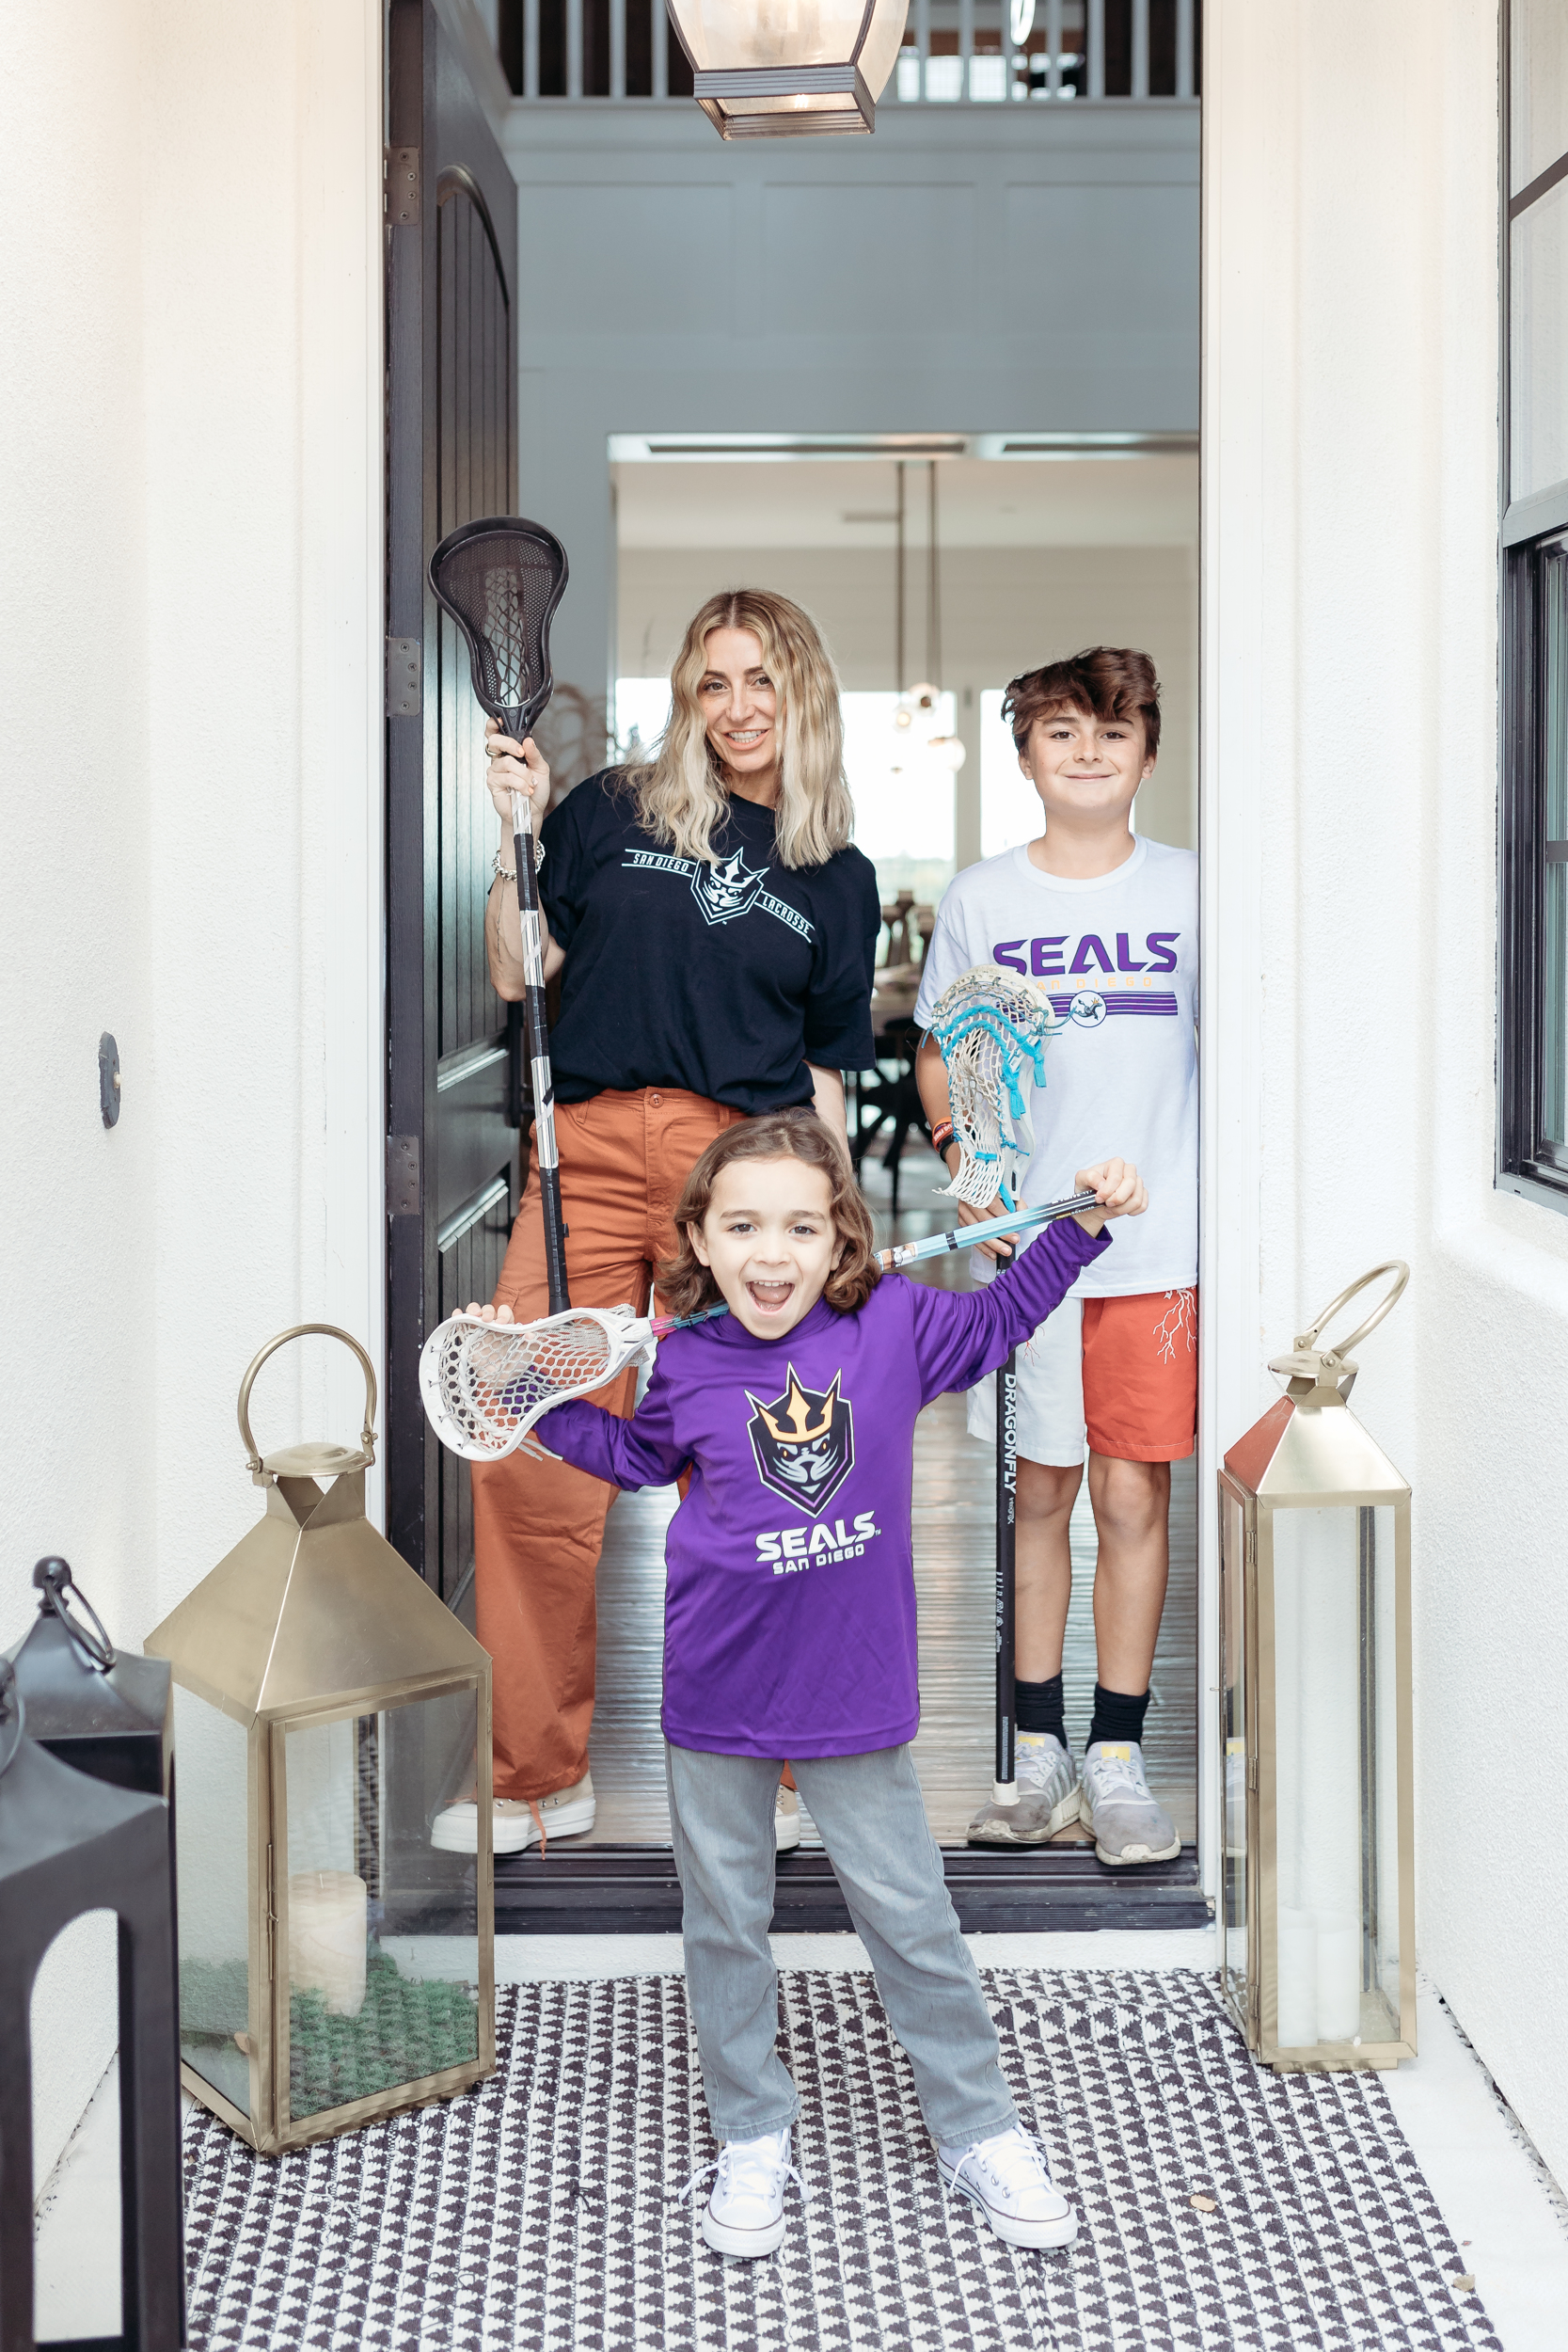 A mom and her two sons stand in a doorway dressed in lacrosse fan gear and holding lacrosse sticks.